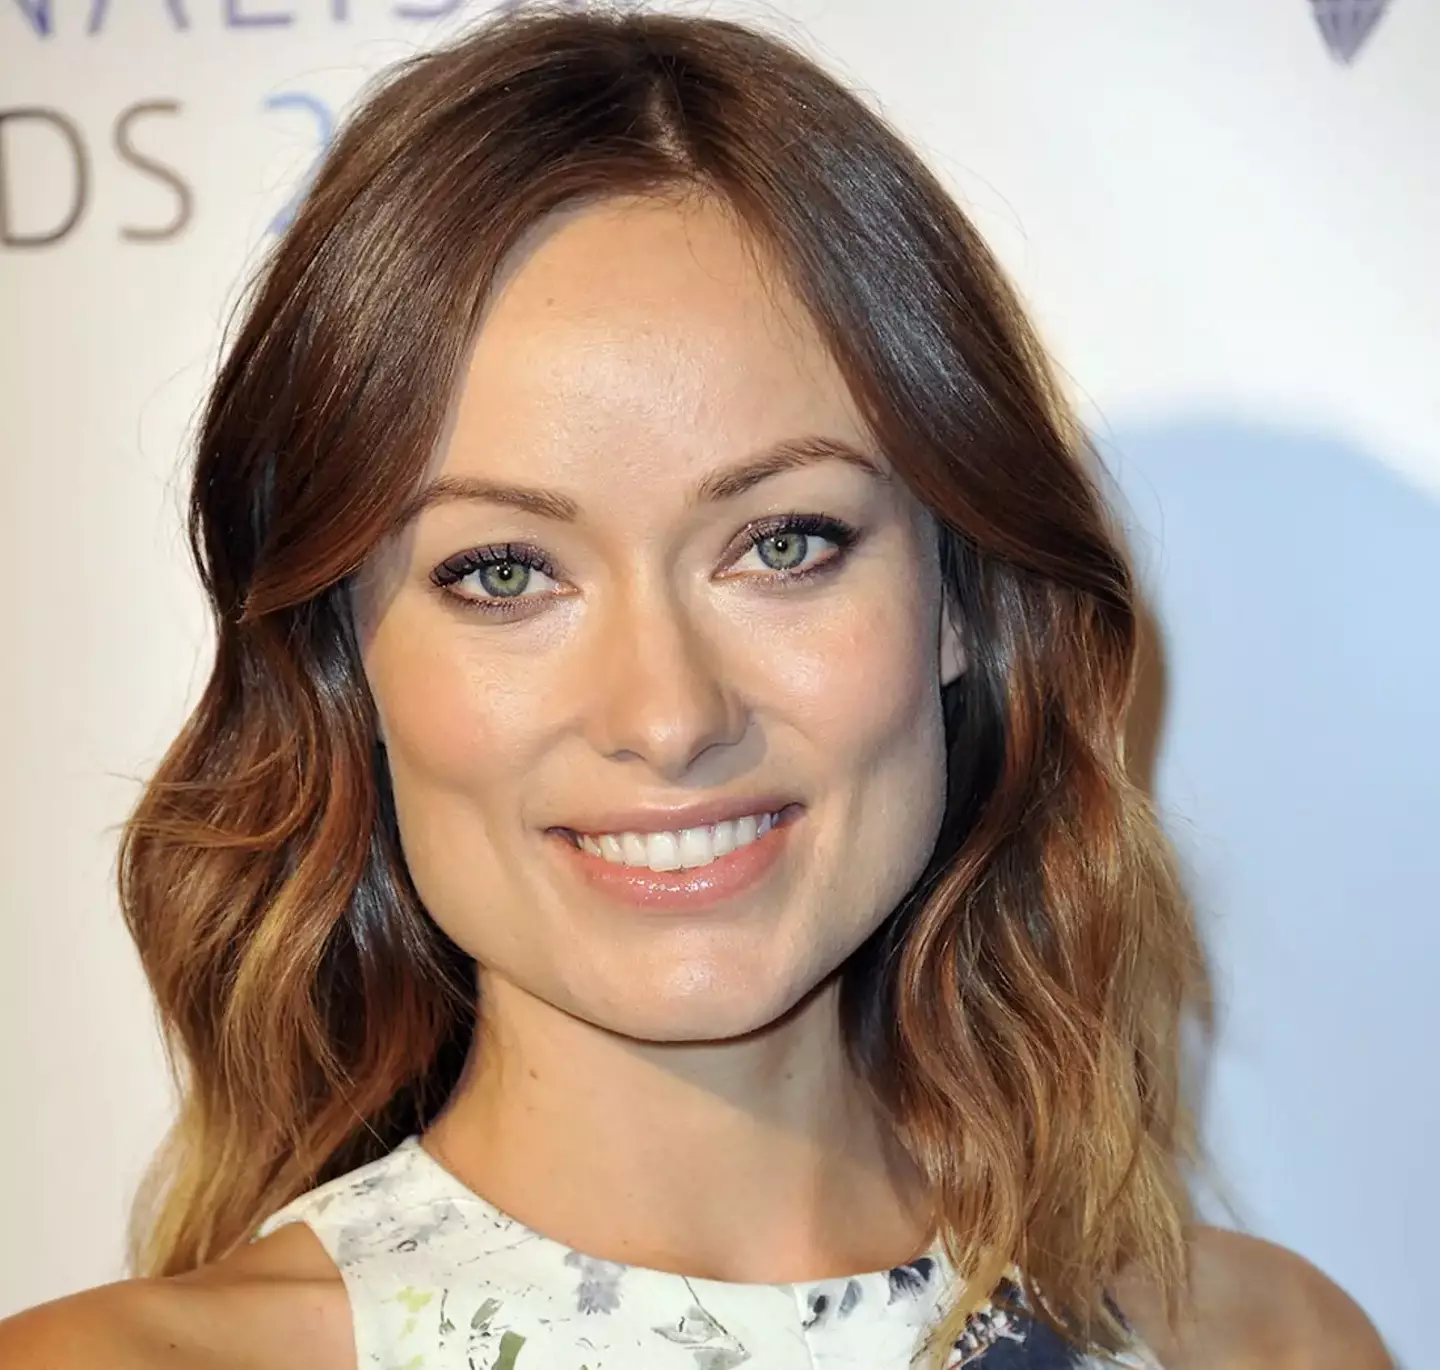 Olivia Wilde said the pay gap claims were 'clickbait'.